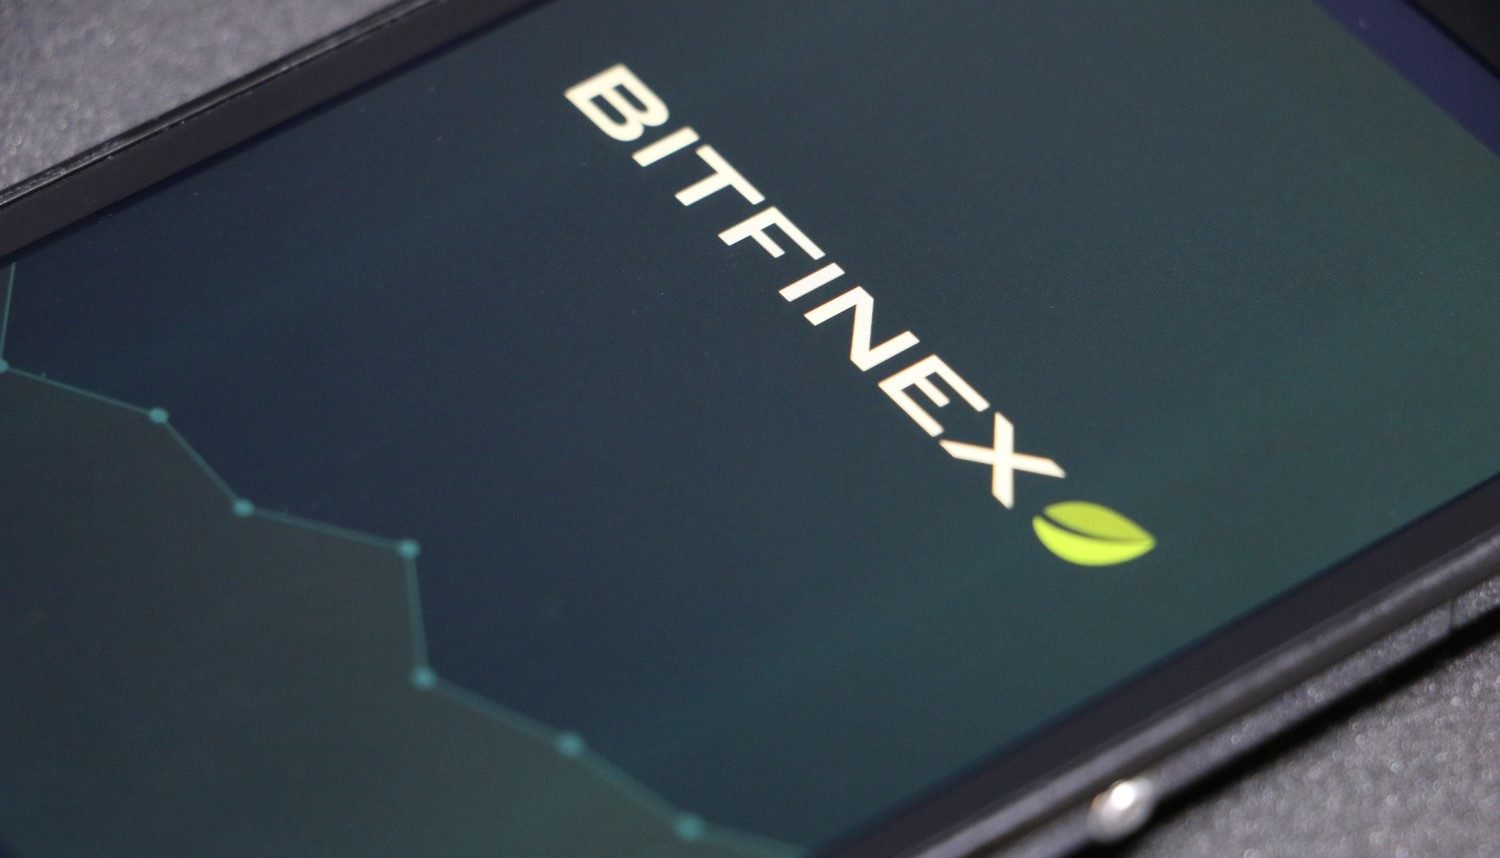 Bitfinex Is Publishing Data For A Tether Market That Doesn’t Exist